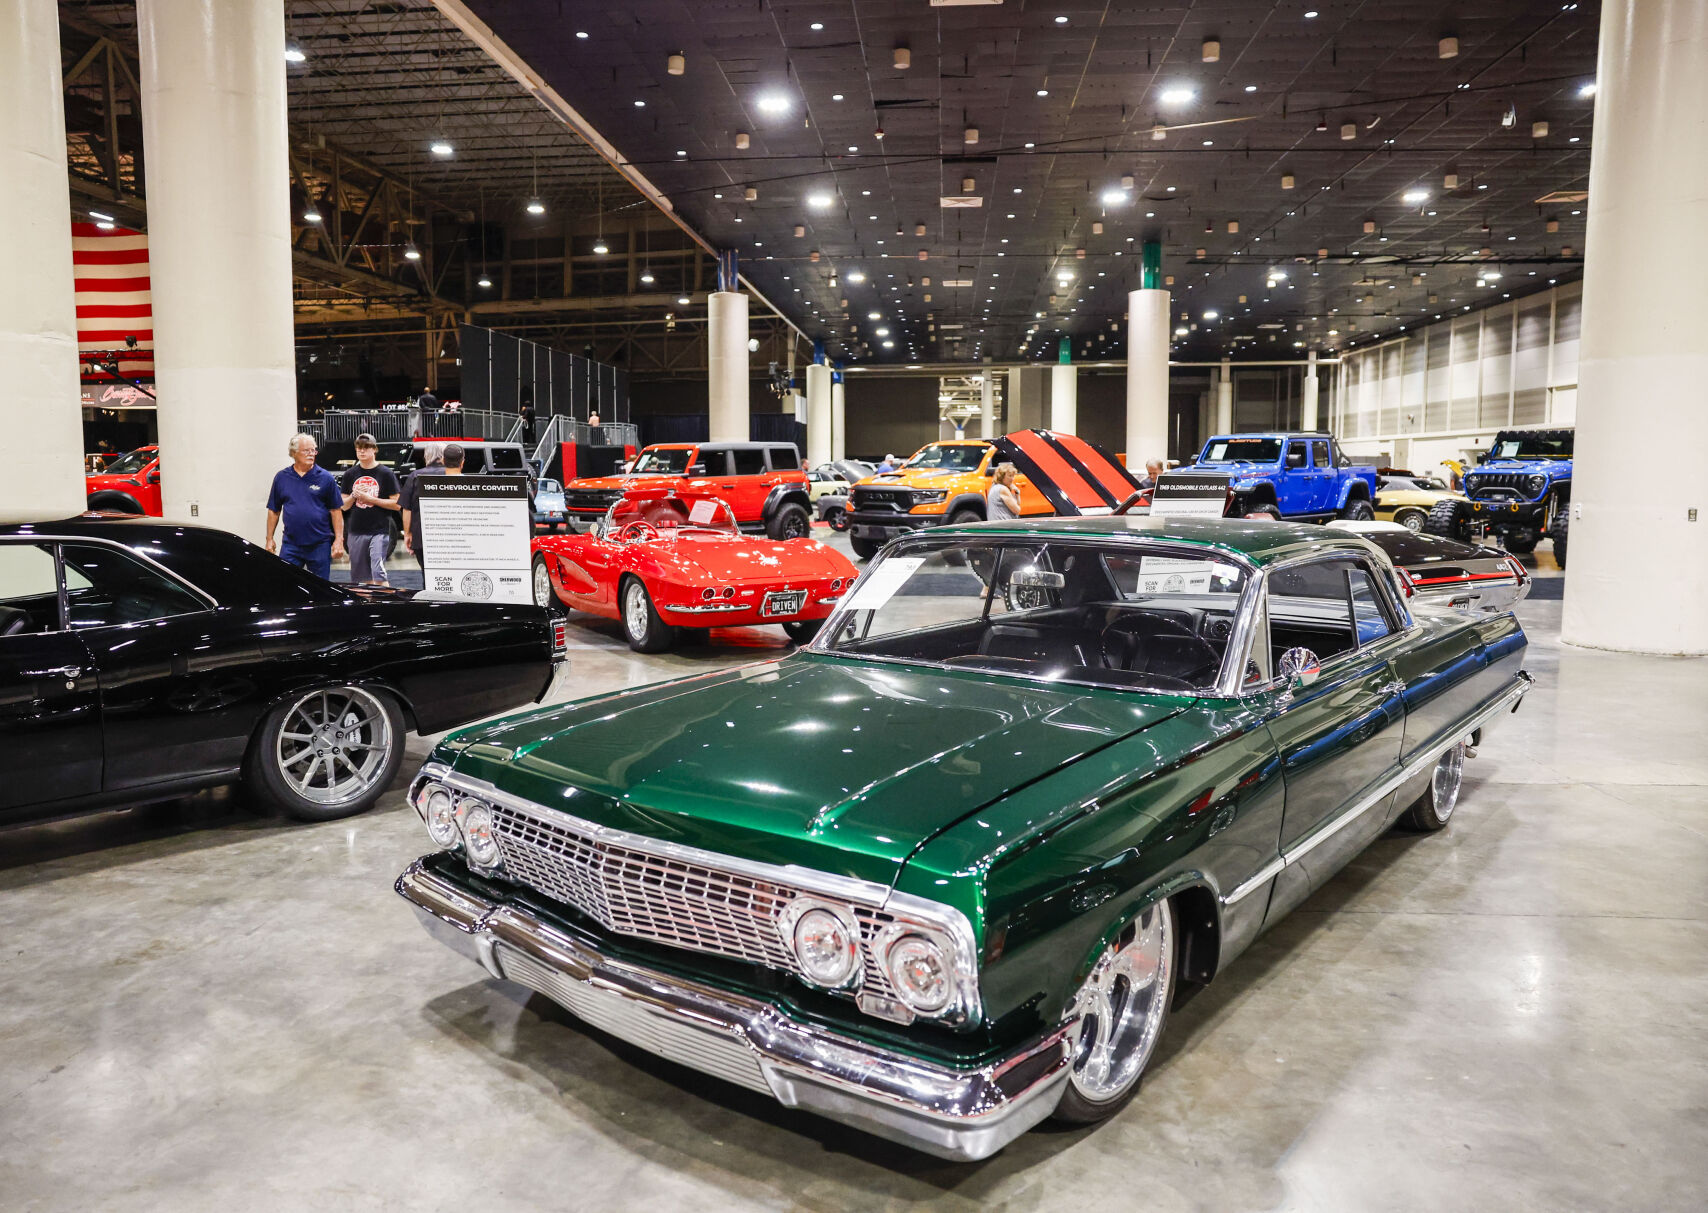 Barrett-Jackson car auction in New Orleans for first time